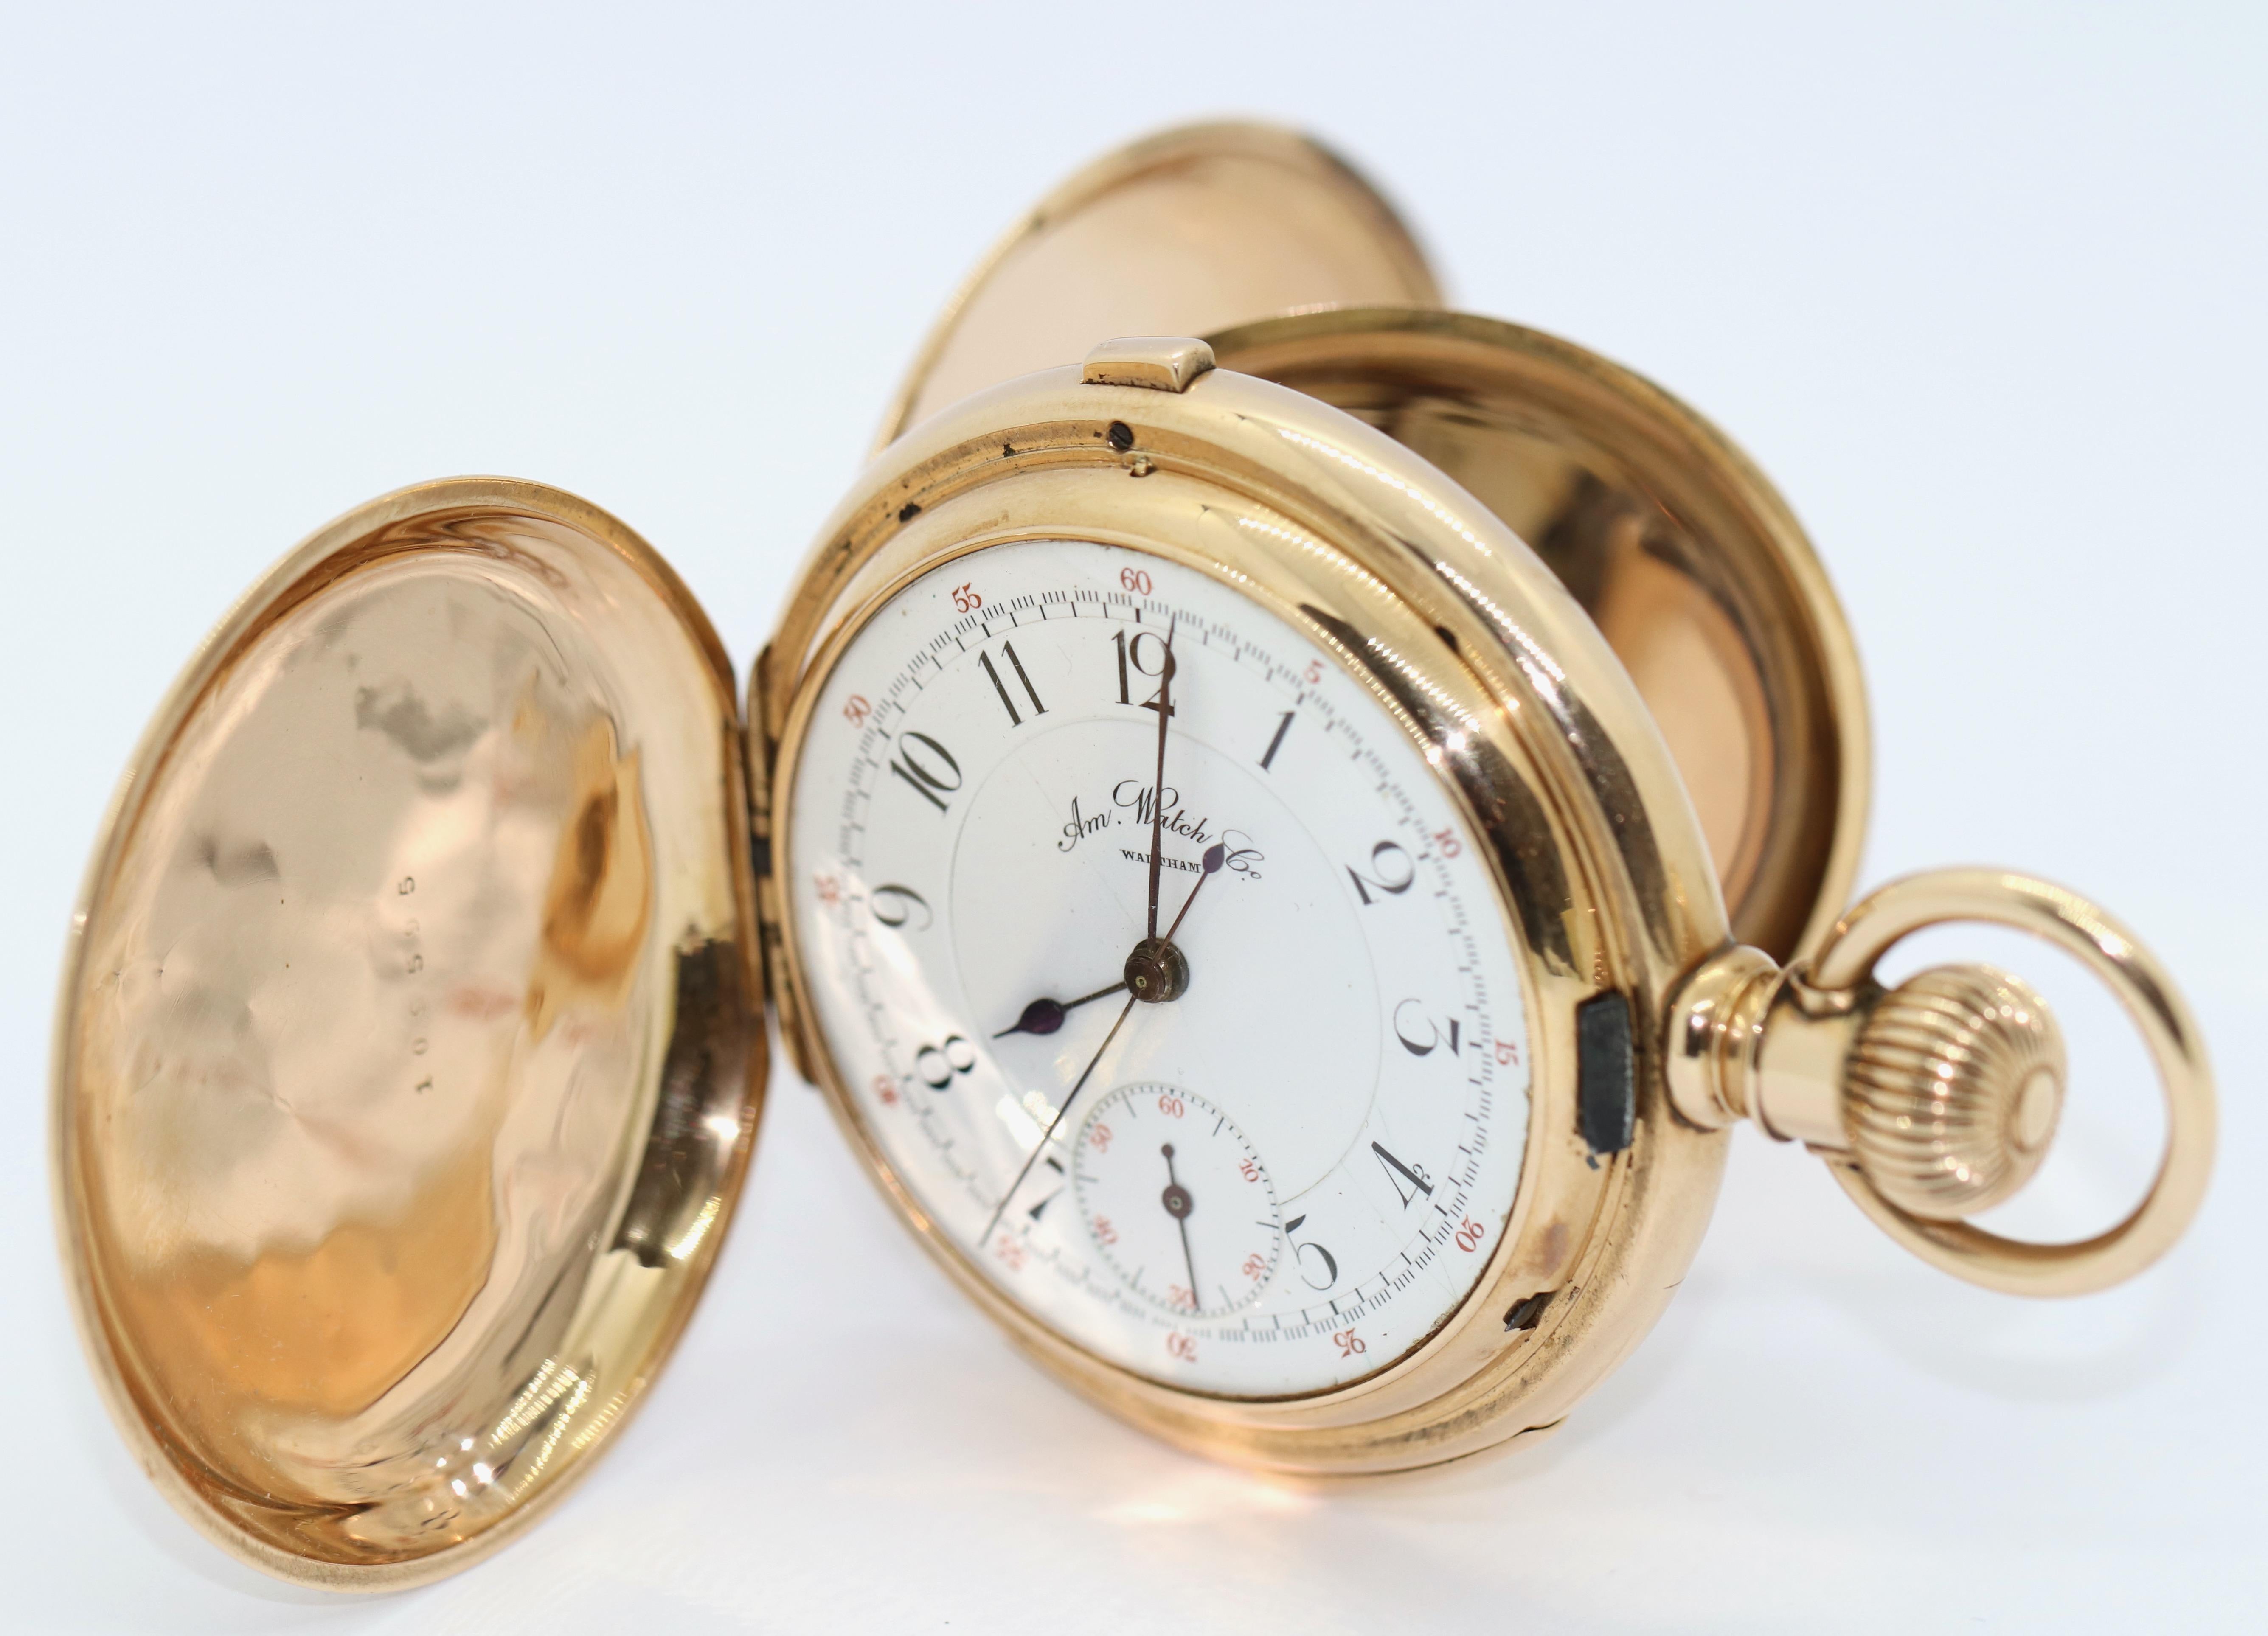 Very rare complicated Pocket Hunter Watch by American Watch Co. Waltham. Chronograph and Repeater. Solid 14 Karat Gold Case. All three lids 14 Karat gold, hallmarked.

Case with the Latin saying 